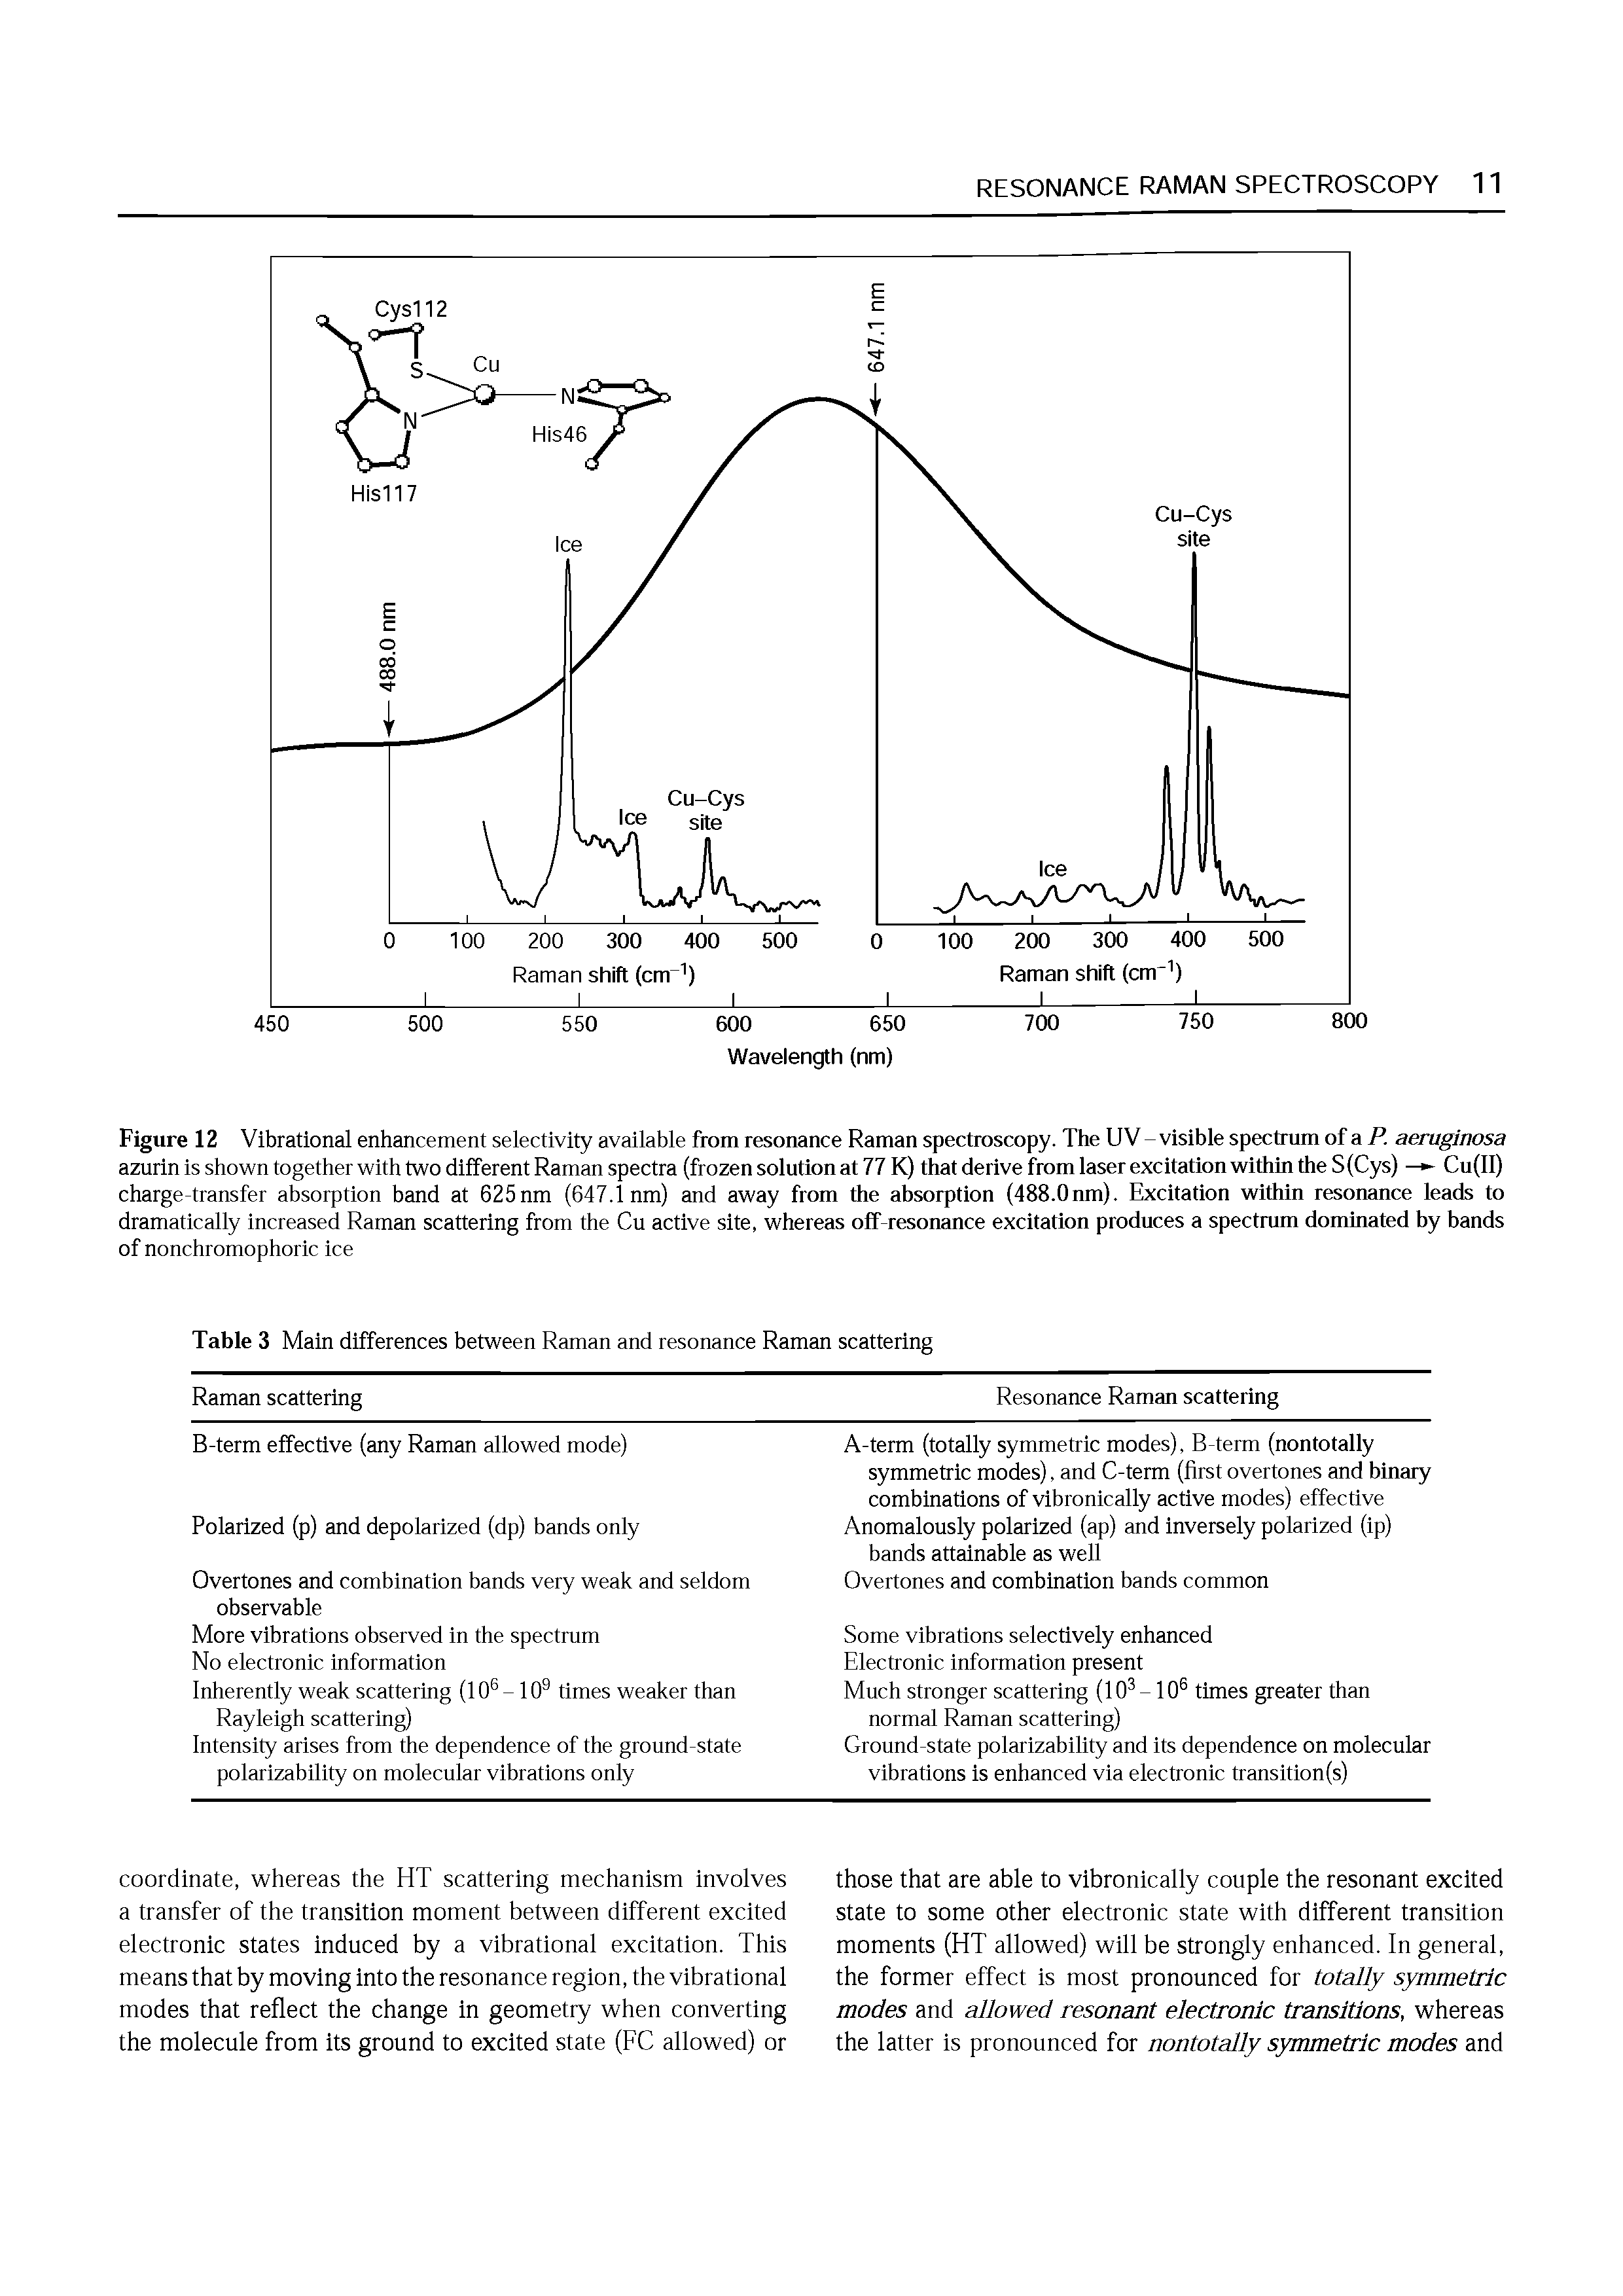 Figure 12 Vibrational enhancement selectivity available from resonance Raman spectroscopy. The UV-visible spectrum of a P. aeruginosa azurin is shown together with two different Raman spectra (frozen solution at 77 K) that derive from laser excitation within theS(Cys) — Cu(II) charge-transfer absorption band at 625nm (647.1 nm) and away from the absorption (488.Onm). Excitation within resonance leads to dramatically increased Raman scattering from the Cu active site, whereas off-resonance excitation produces a spectrum dominated by bands...